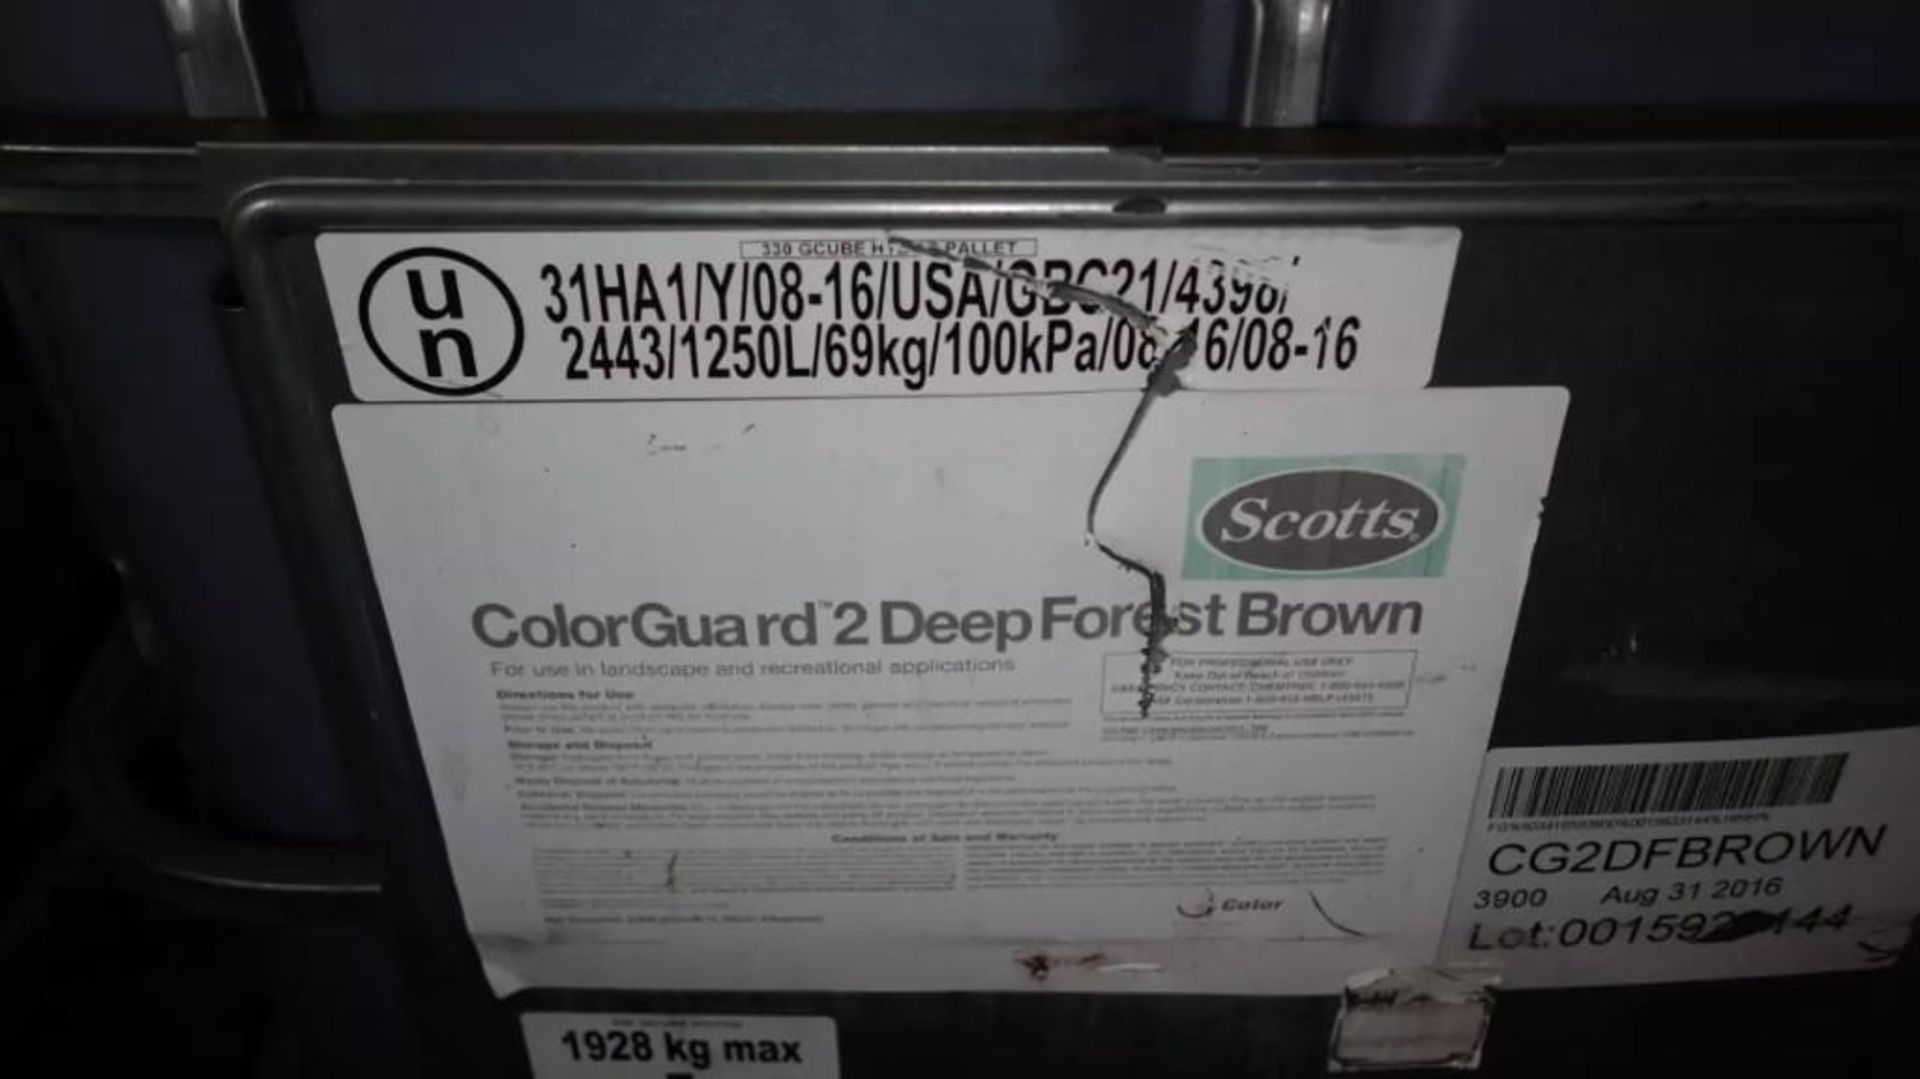 LOT OF 2 330 GALLON TANKS OF COLOR GUARD 2 DEEP FOREST BROWN MULCH DYE - Image 4 of 4